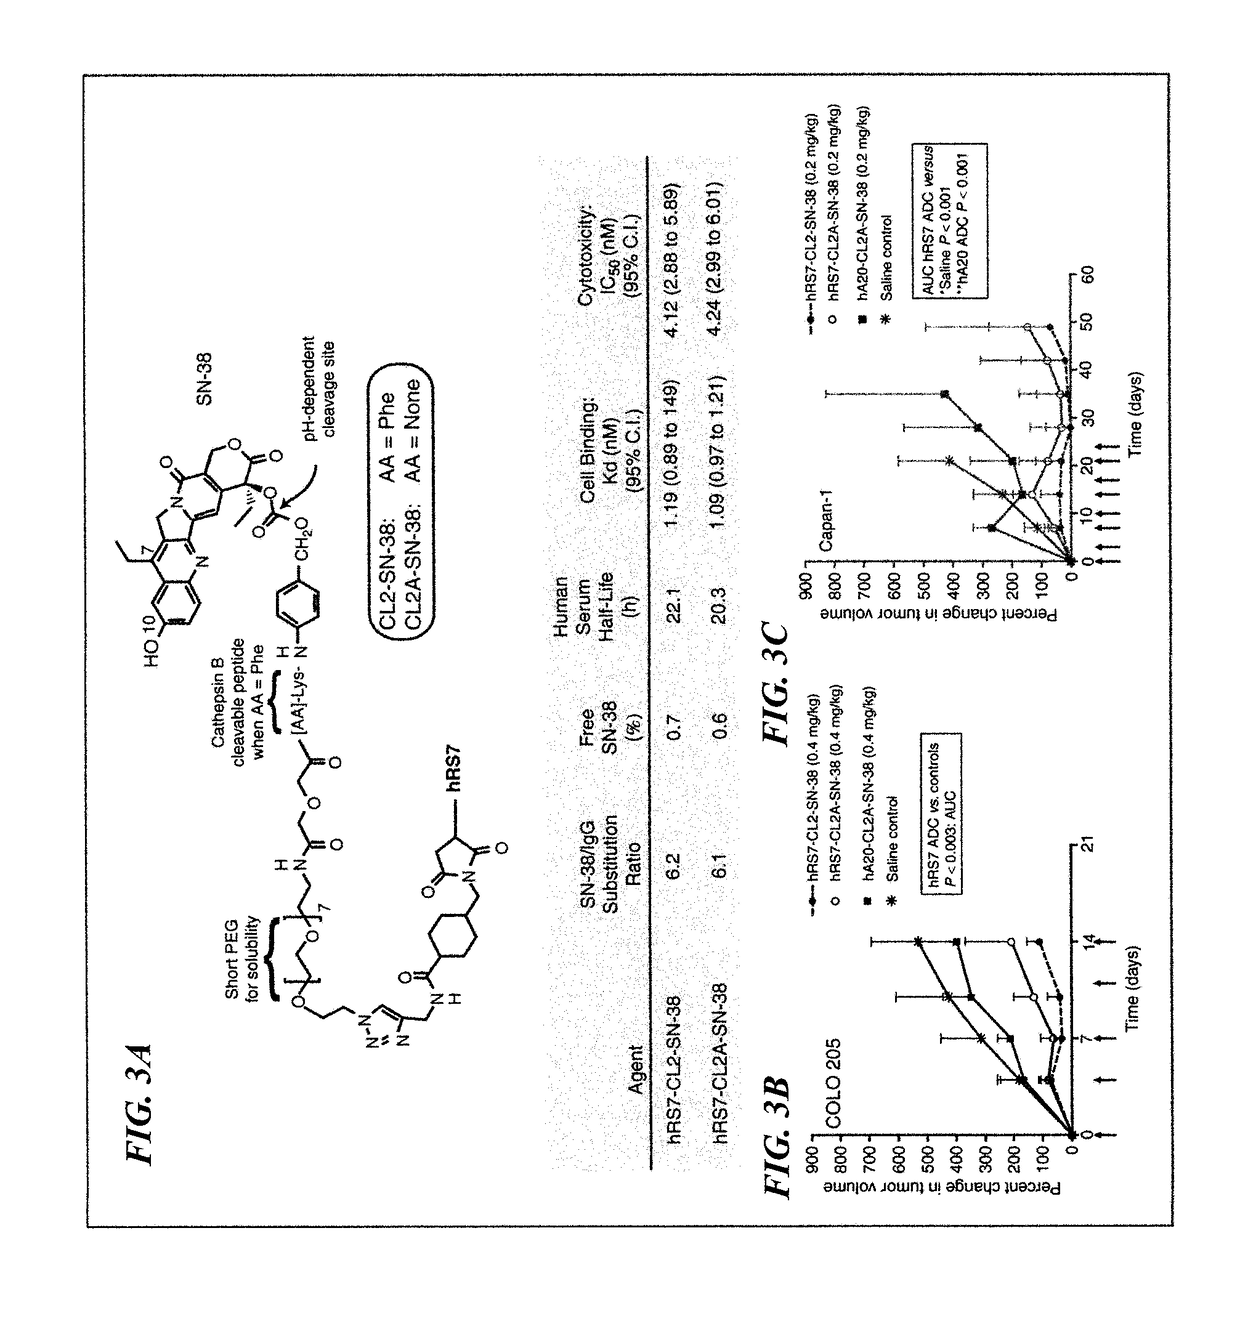 Therapy of small-cell lung cancer (SCLC) with a topoisomerase-i inhibiting antibody-drug conjugate (ADC) targeting trop-2